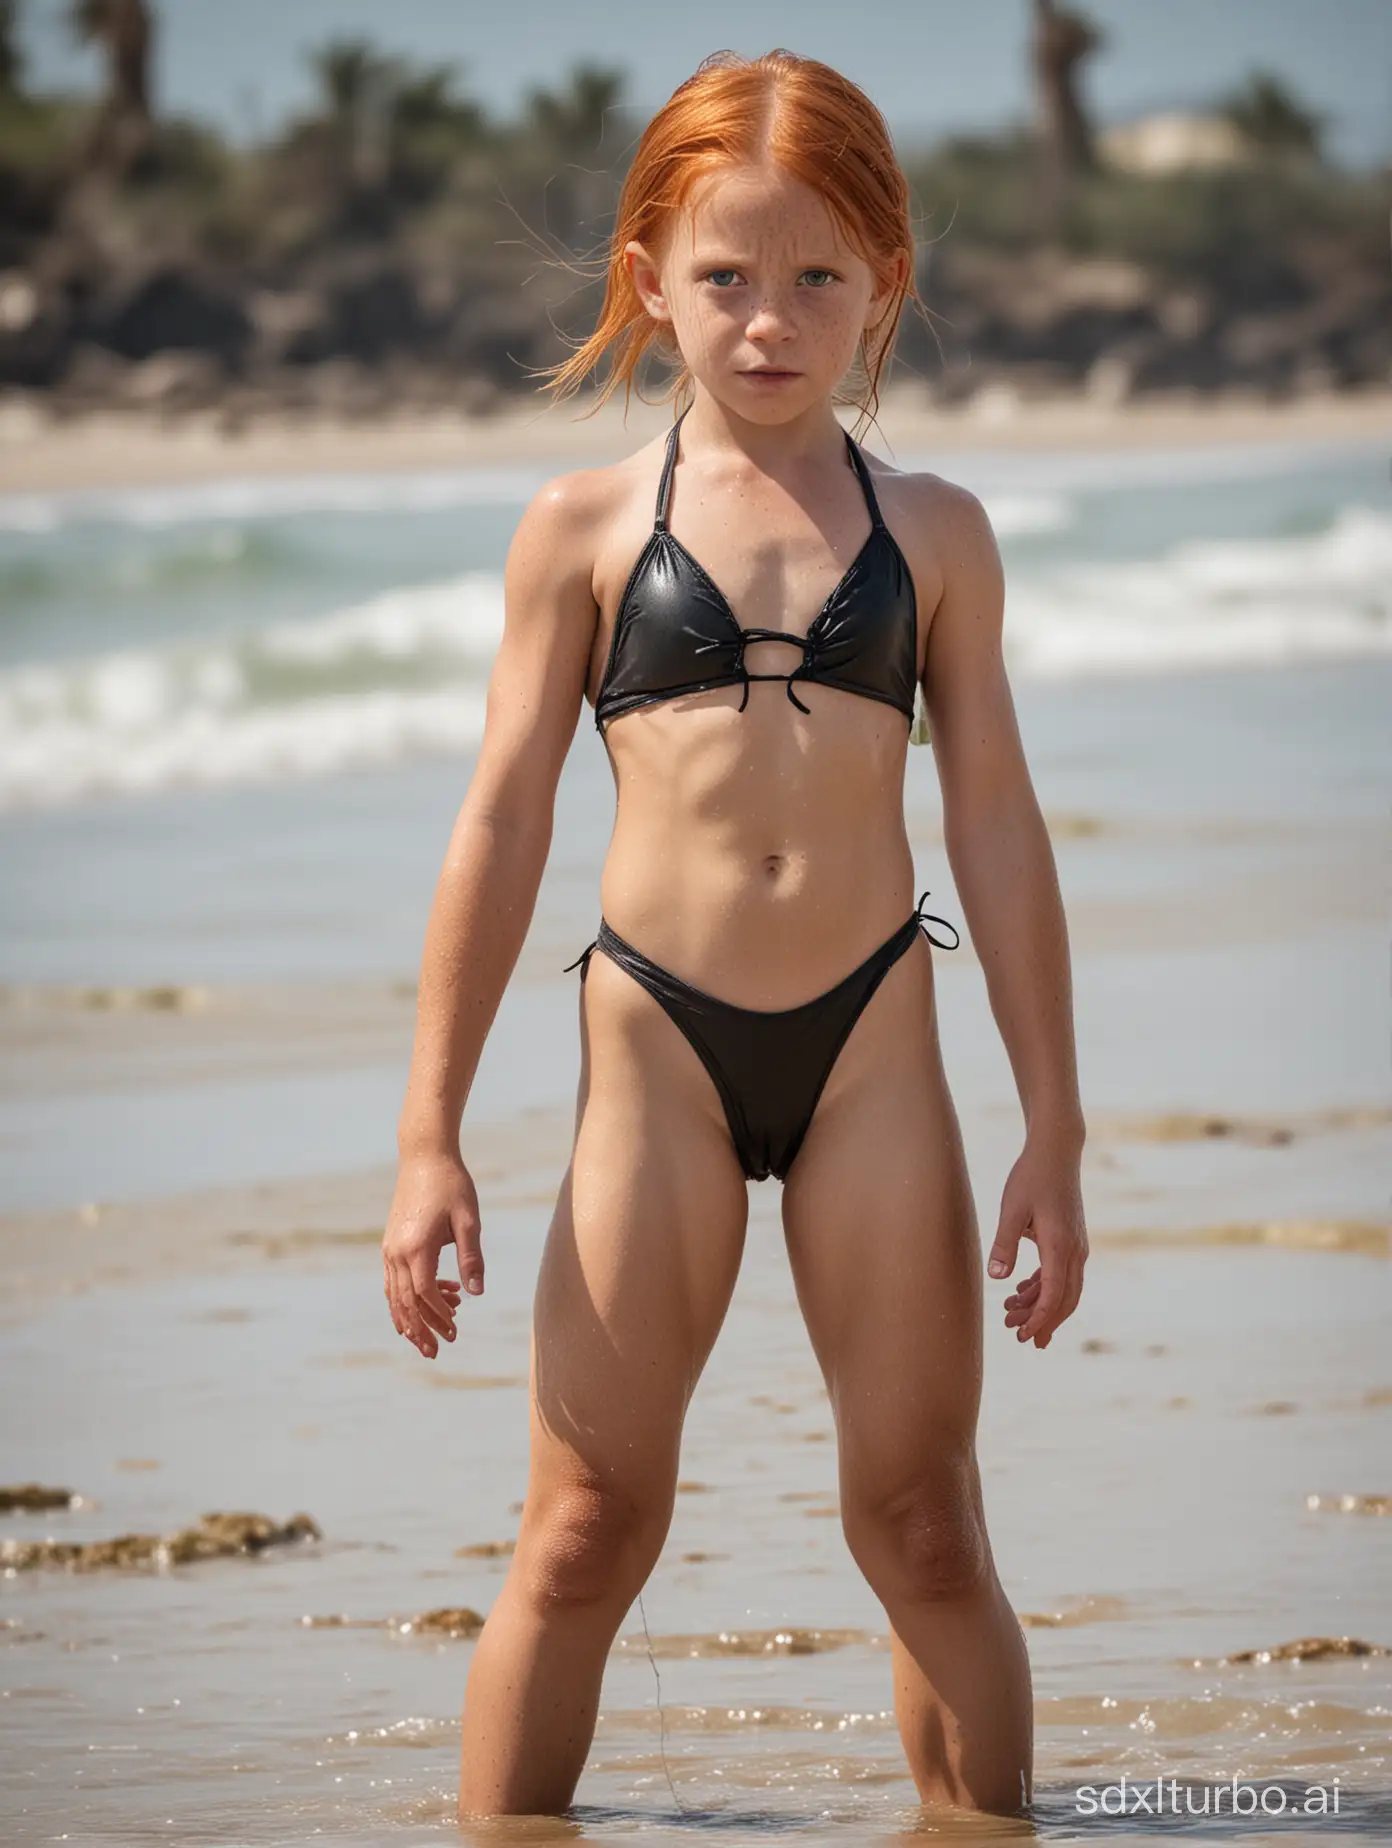 7 years old ginger hari girl, very muscular abs, string bathingsuit at the beach, in Zombie world